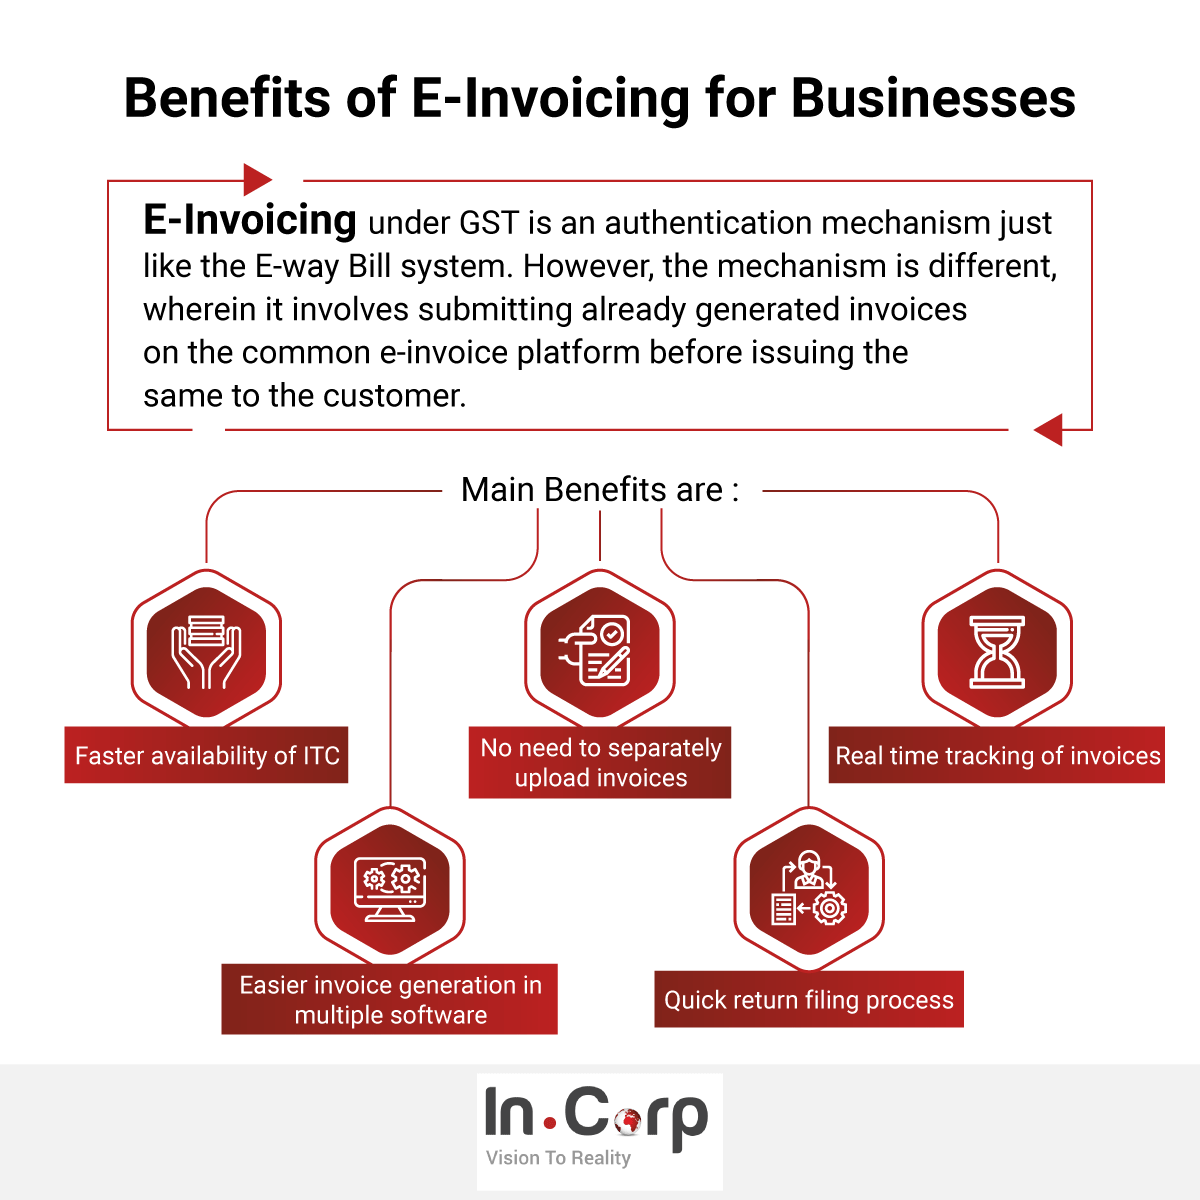 What are the benefits of E-Invoicing?